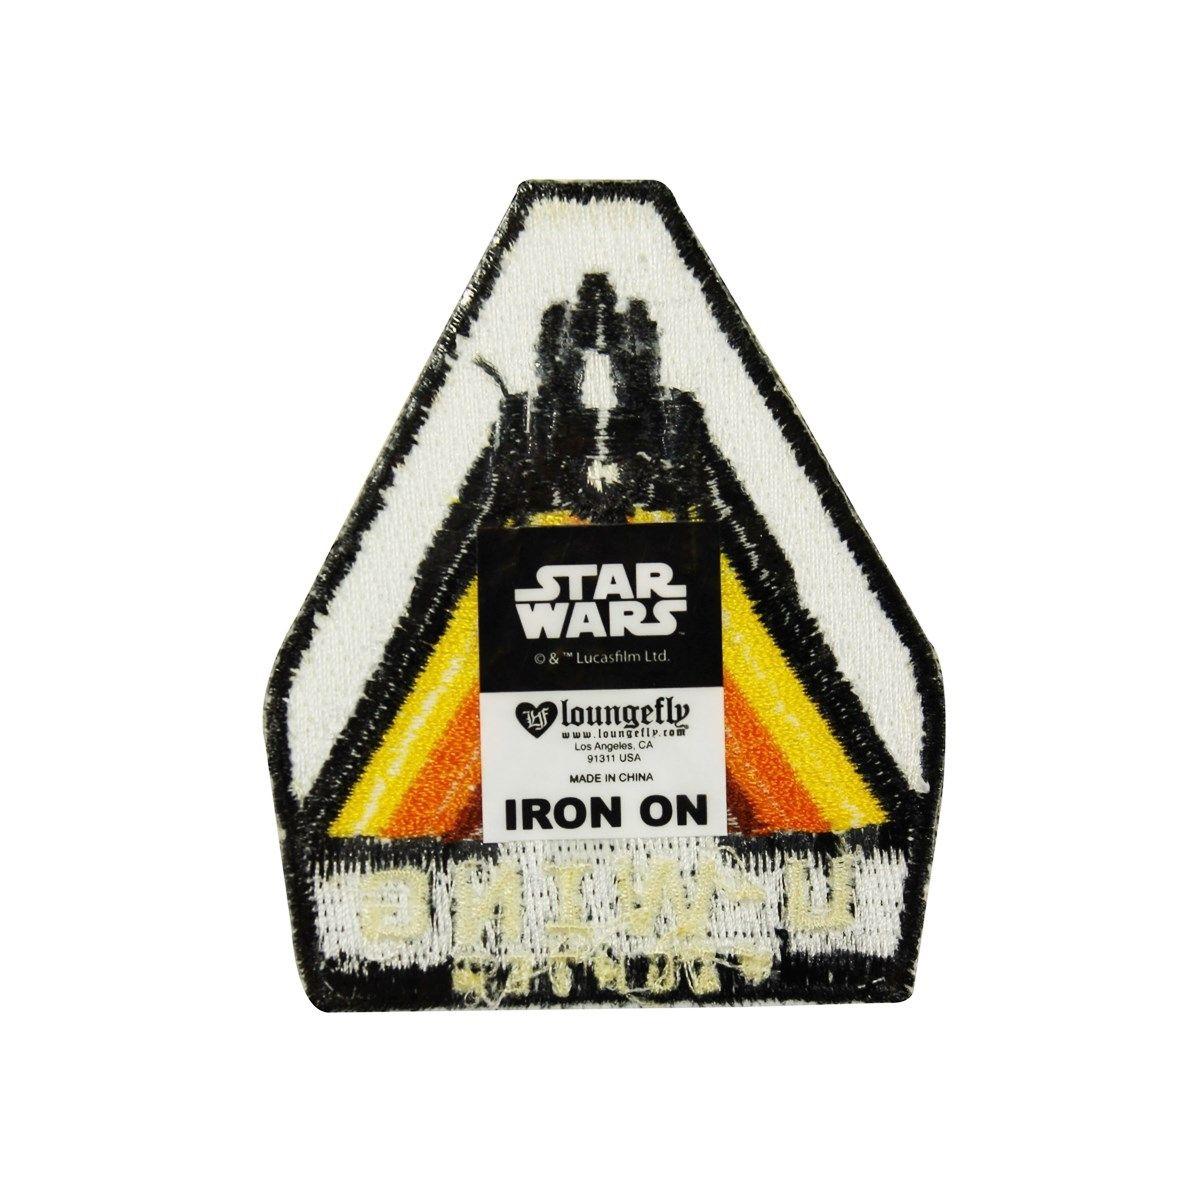 U Wing Logo - Star Wars U Wing Fighter Patch Rogue One Spaceship Embroidered Iron